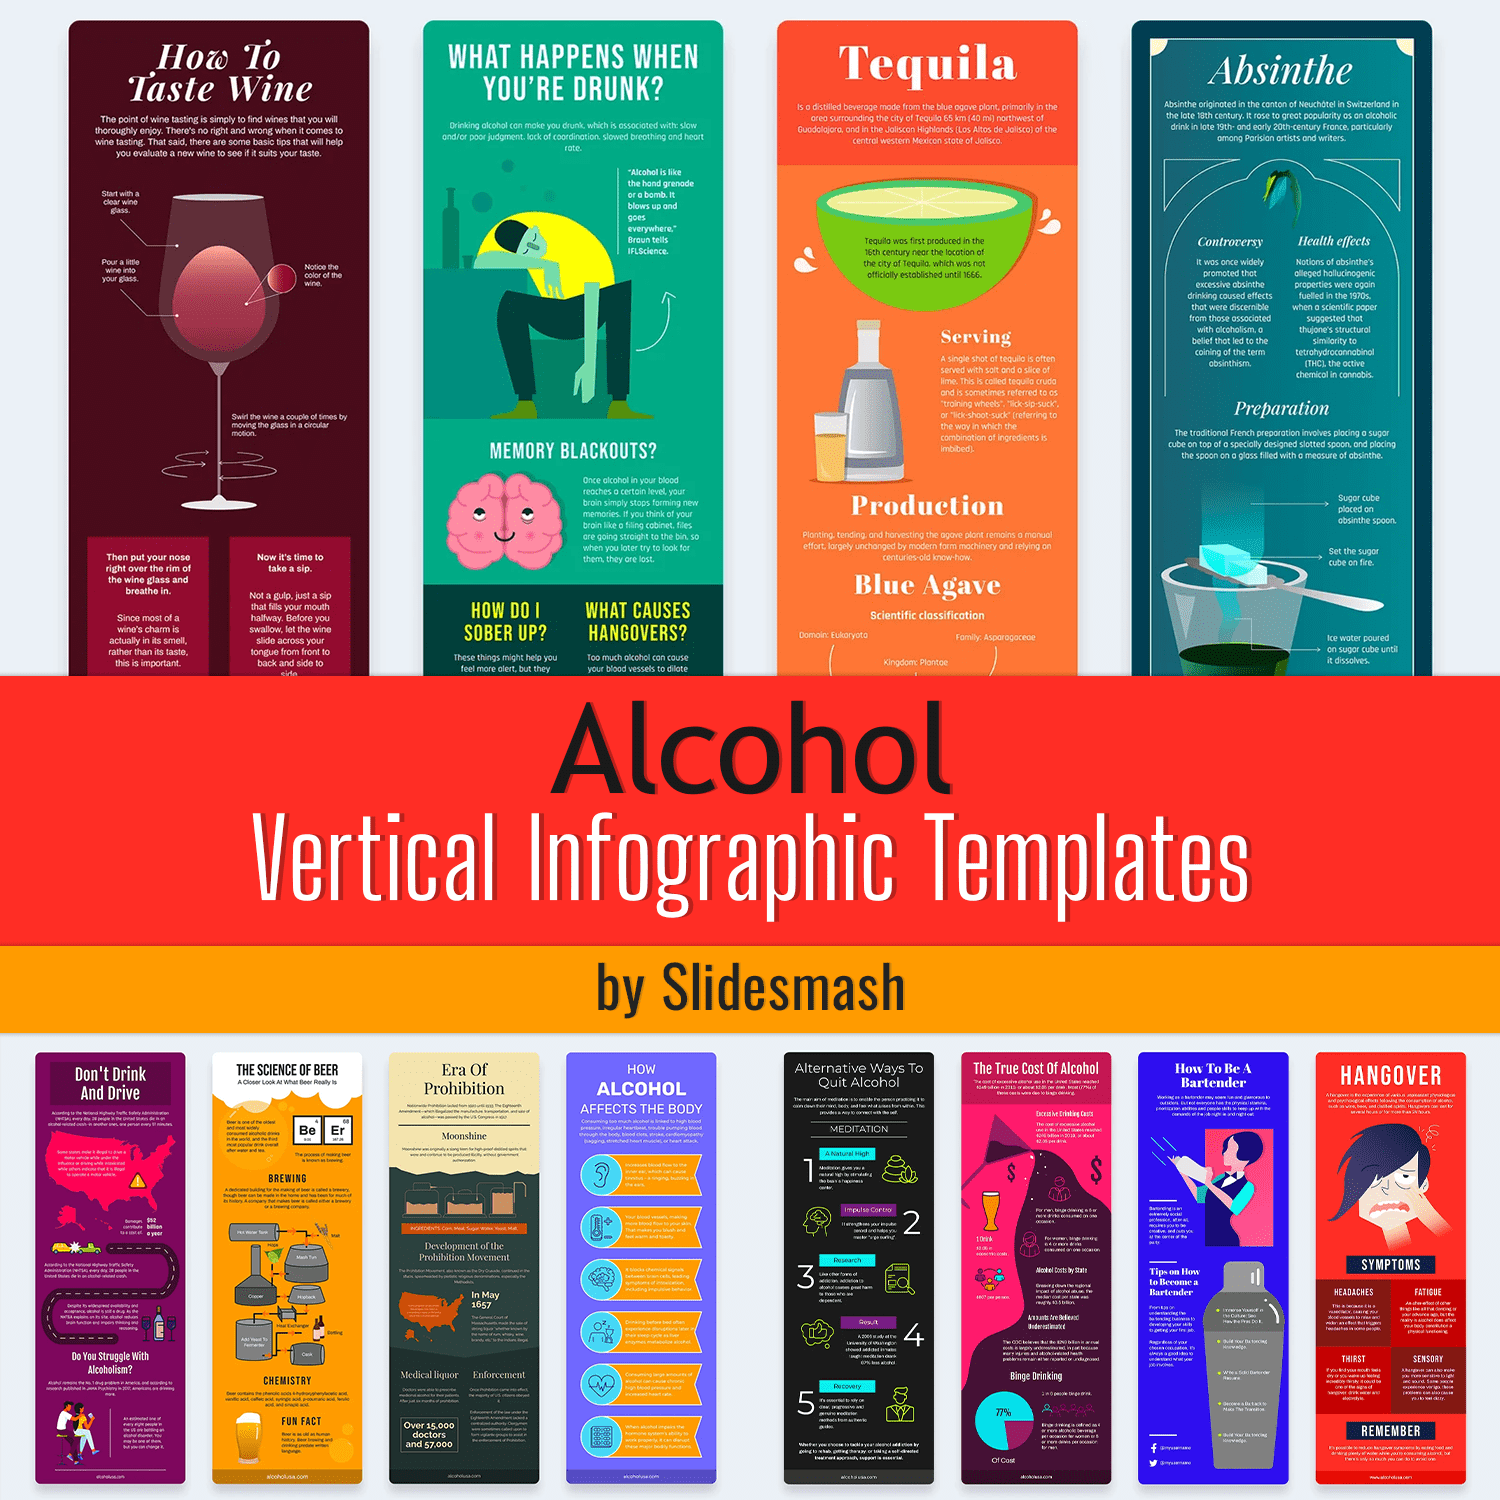 Alcohol Vertical Infographic Templates | Diagrams For PowerPoint, Illustrator, Keynote, Google Slides Cover.